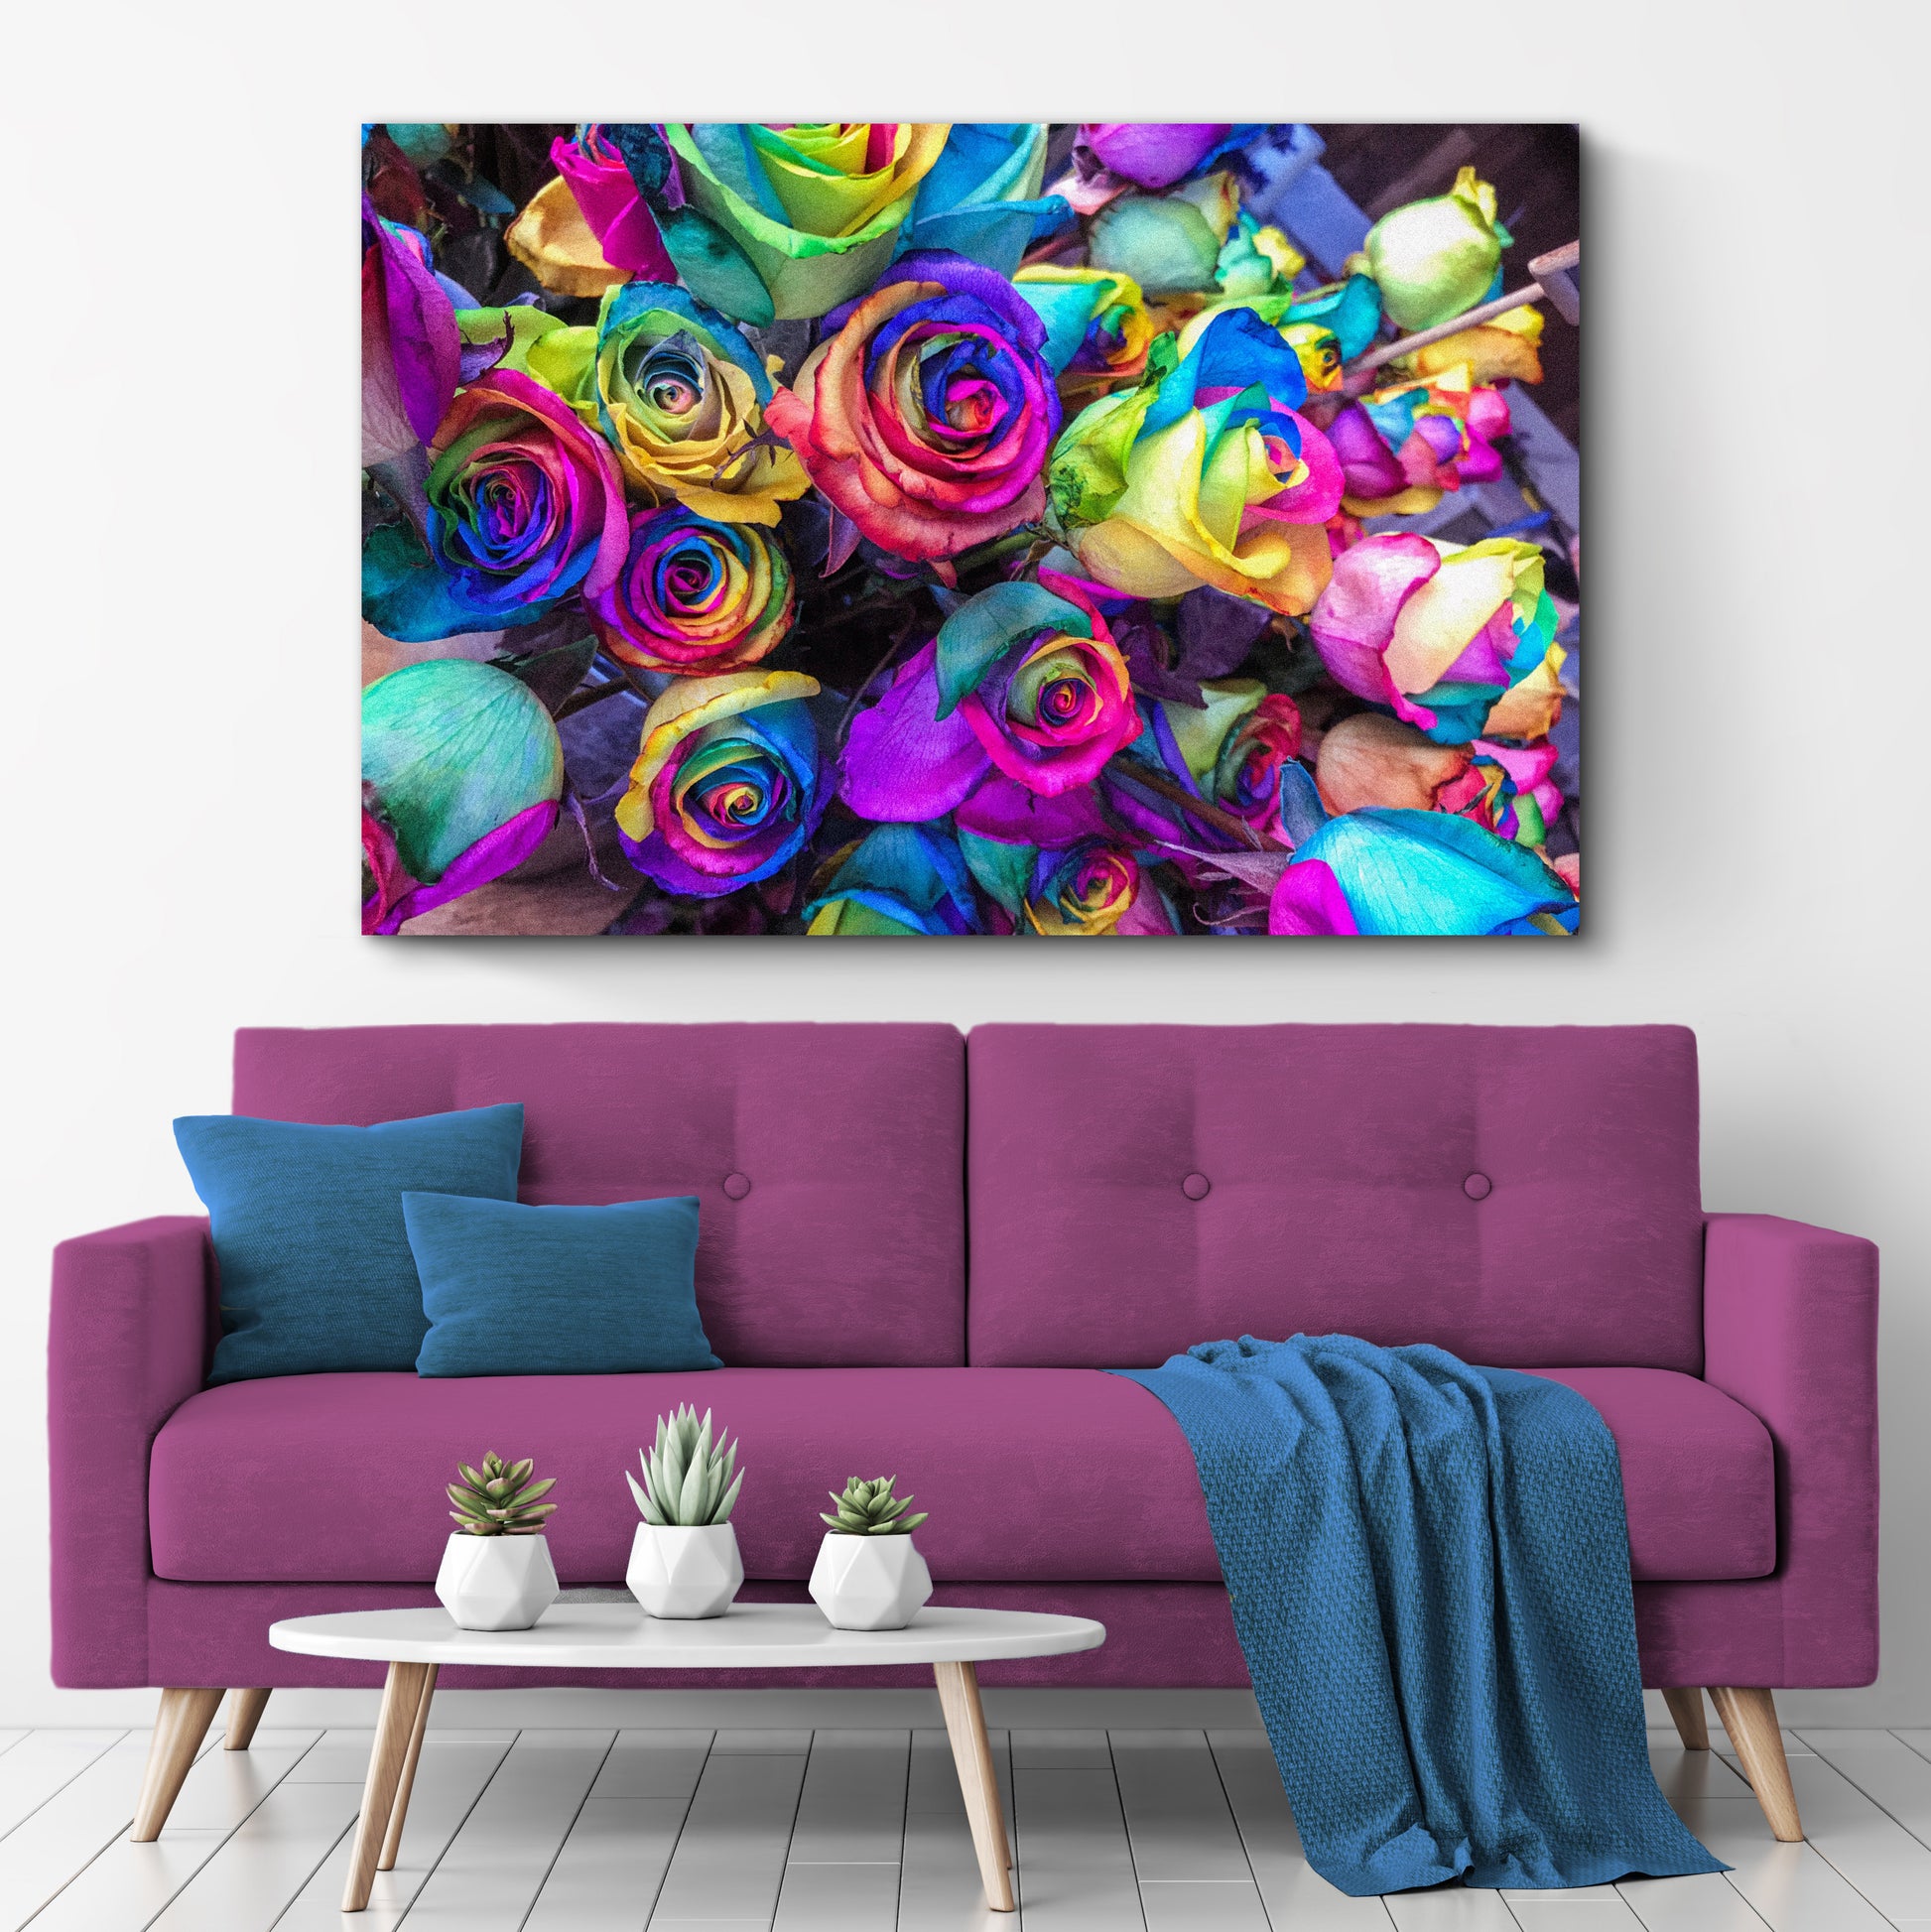 Rainbow Roses Canvas Wall Art Style 2 - Image by Tailored Canvases